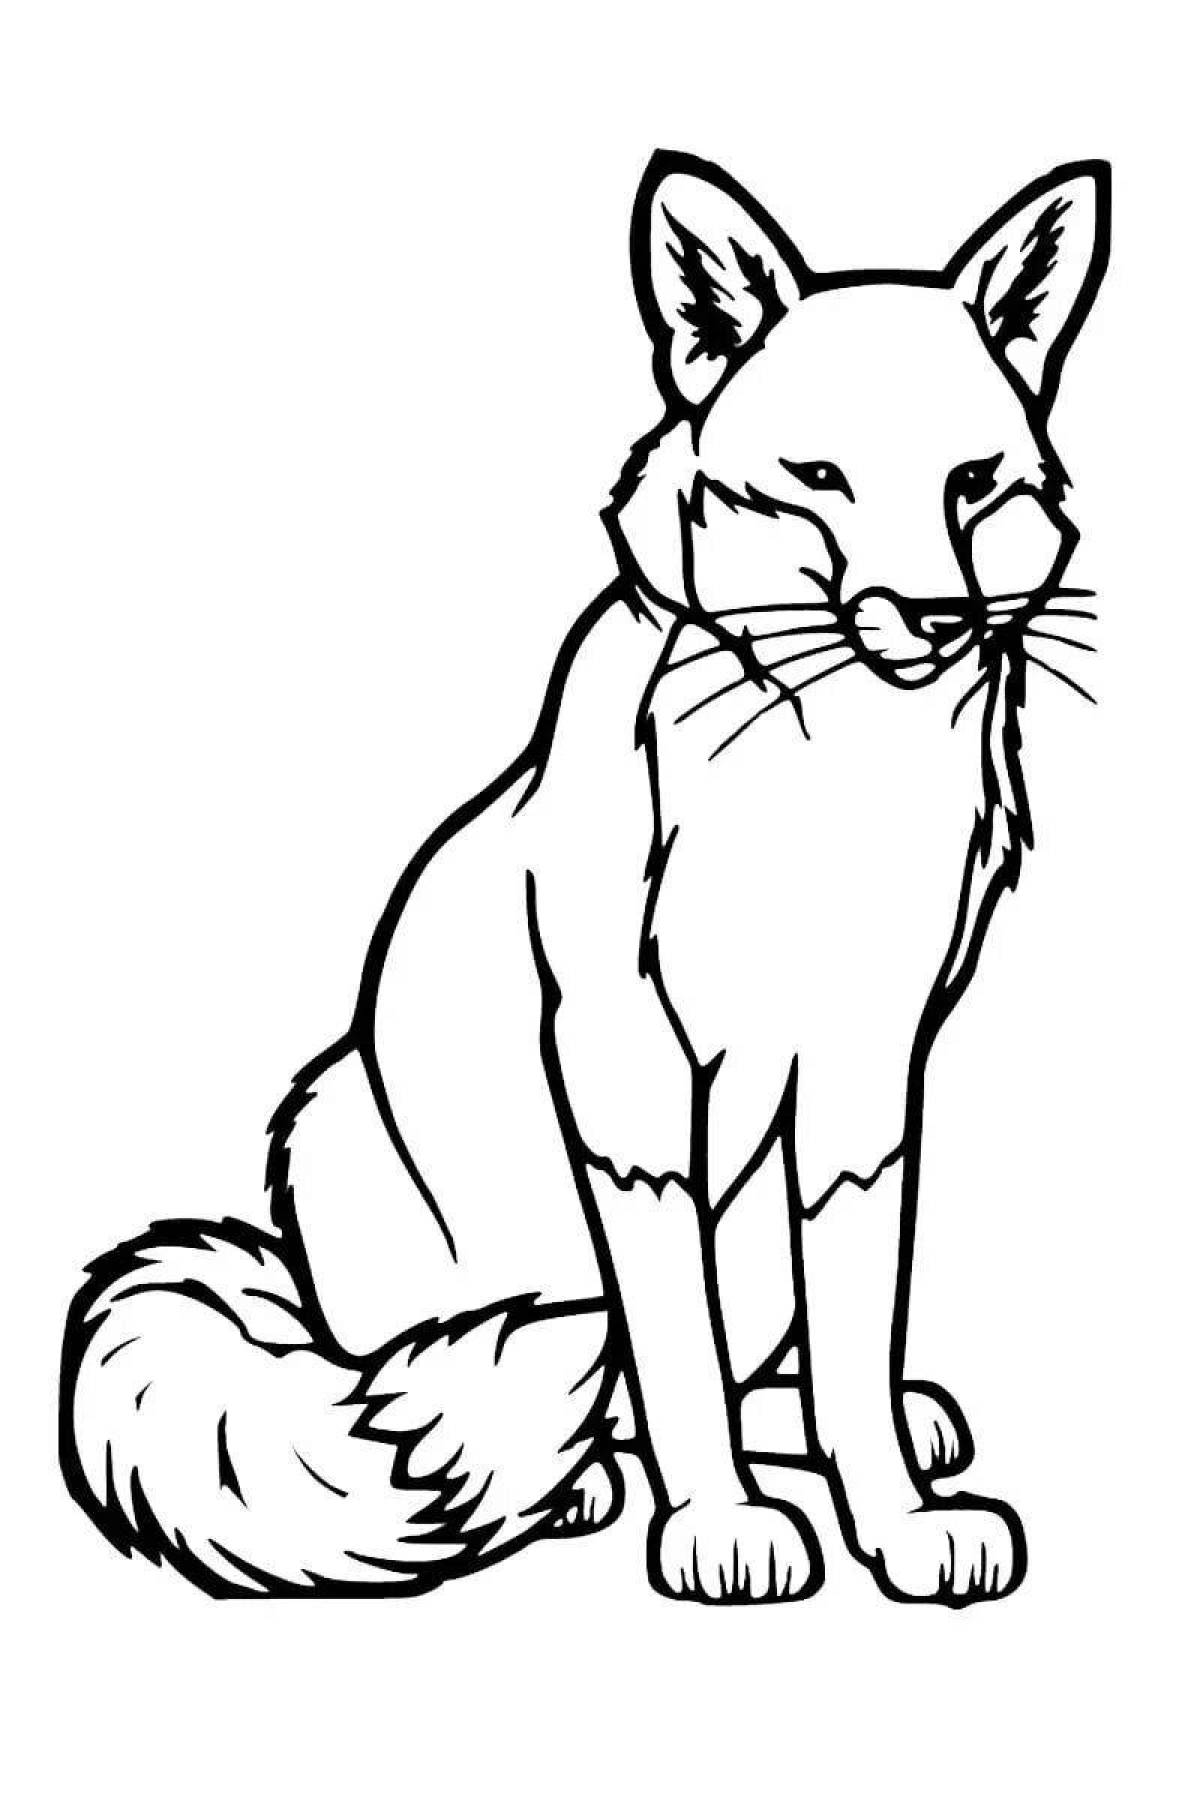 Coloring pages with playful foxes for kids